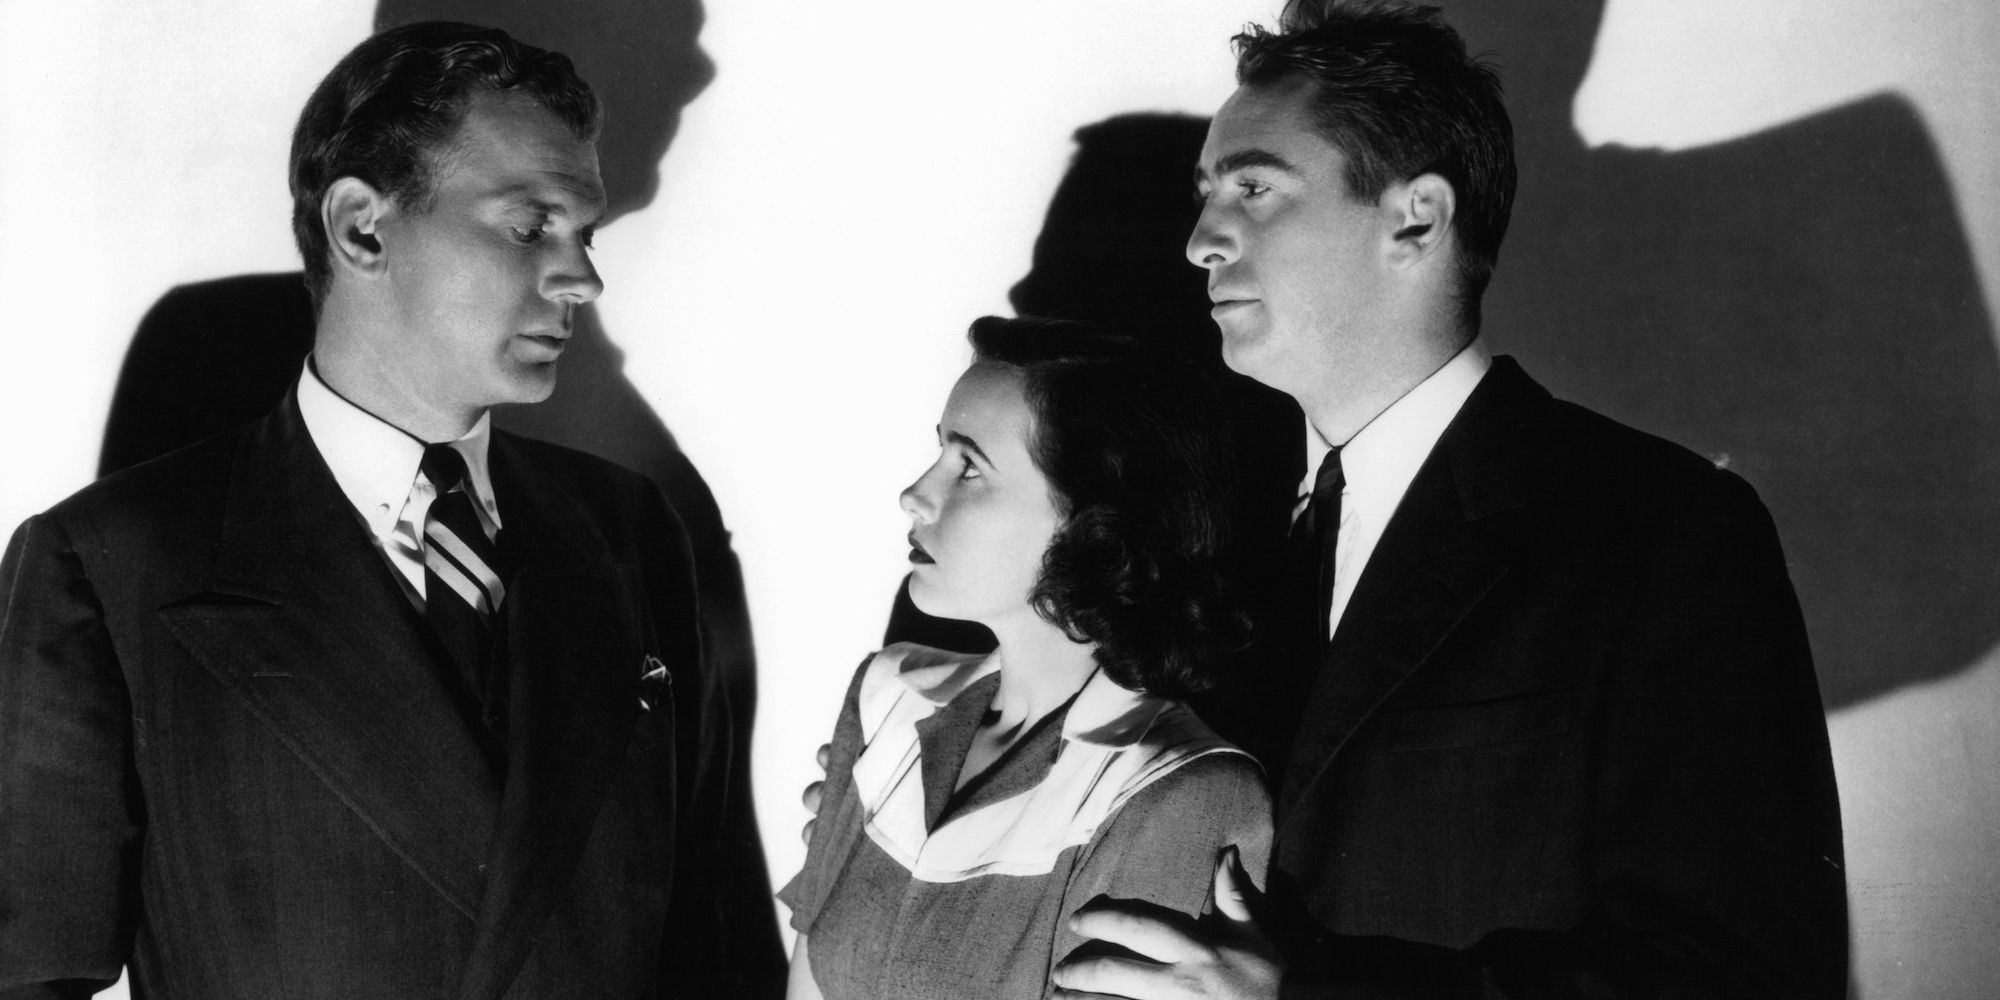 Joseph Cotten, Teresa Wright, and Macdonald Carey in Shadow of a Doubt